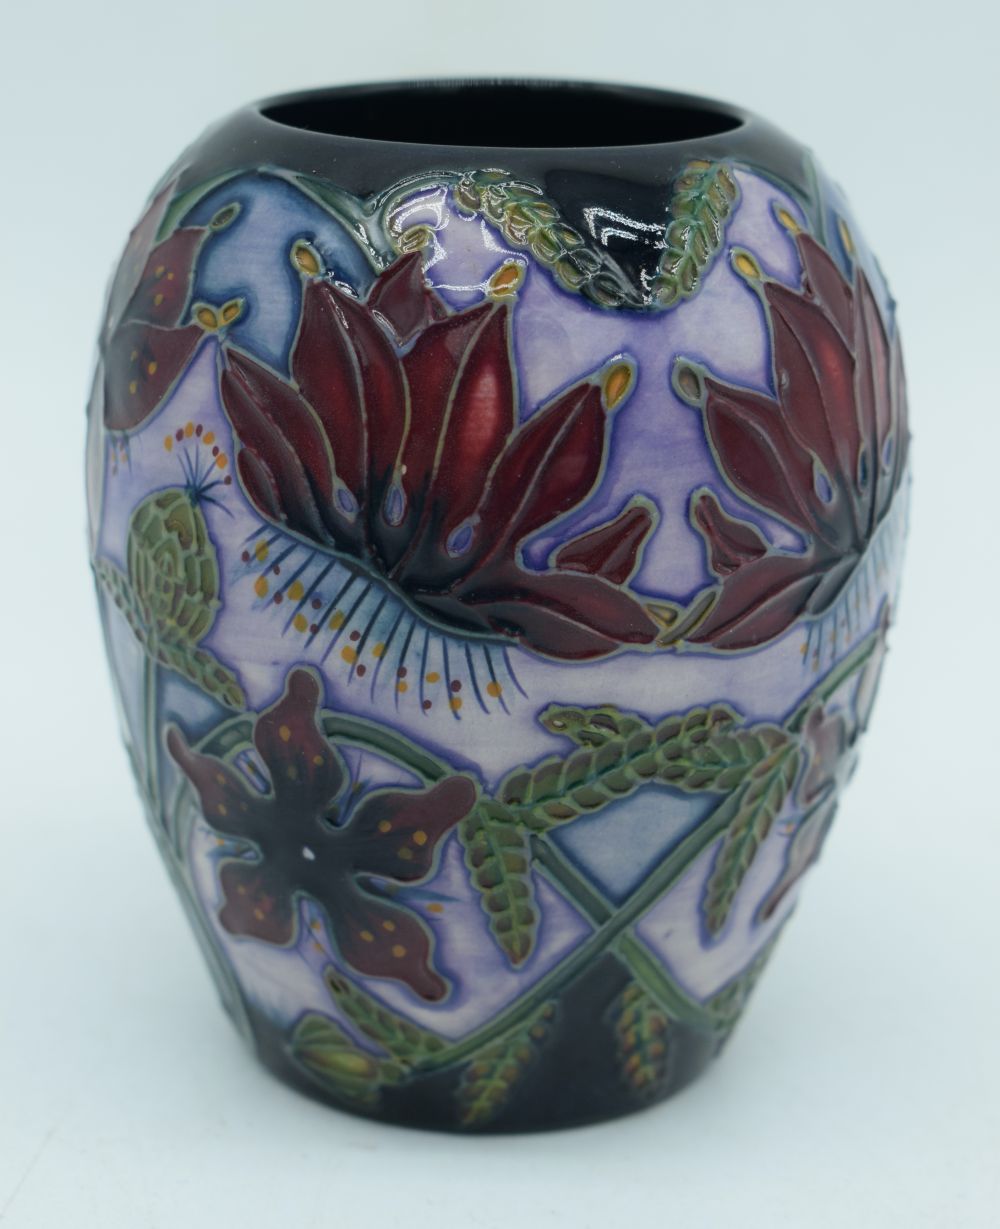 Moorcroft Pottery Vase in the Delonix Pattern, Designed by Shirley Hayes 2003. 9 x 7cm - Image 6 of 8